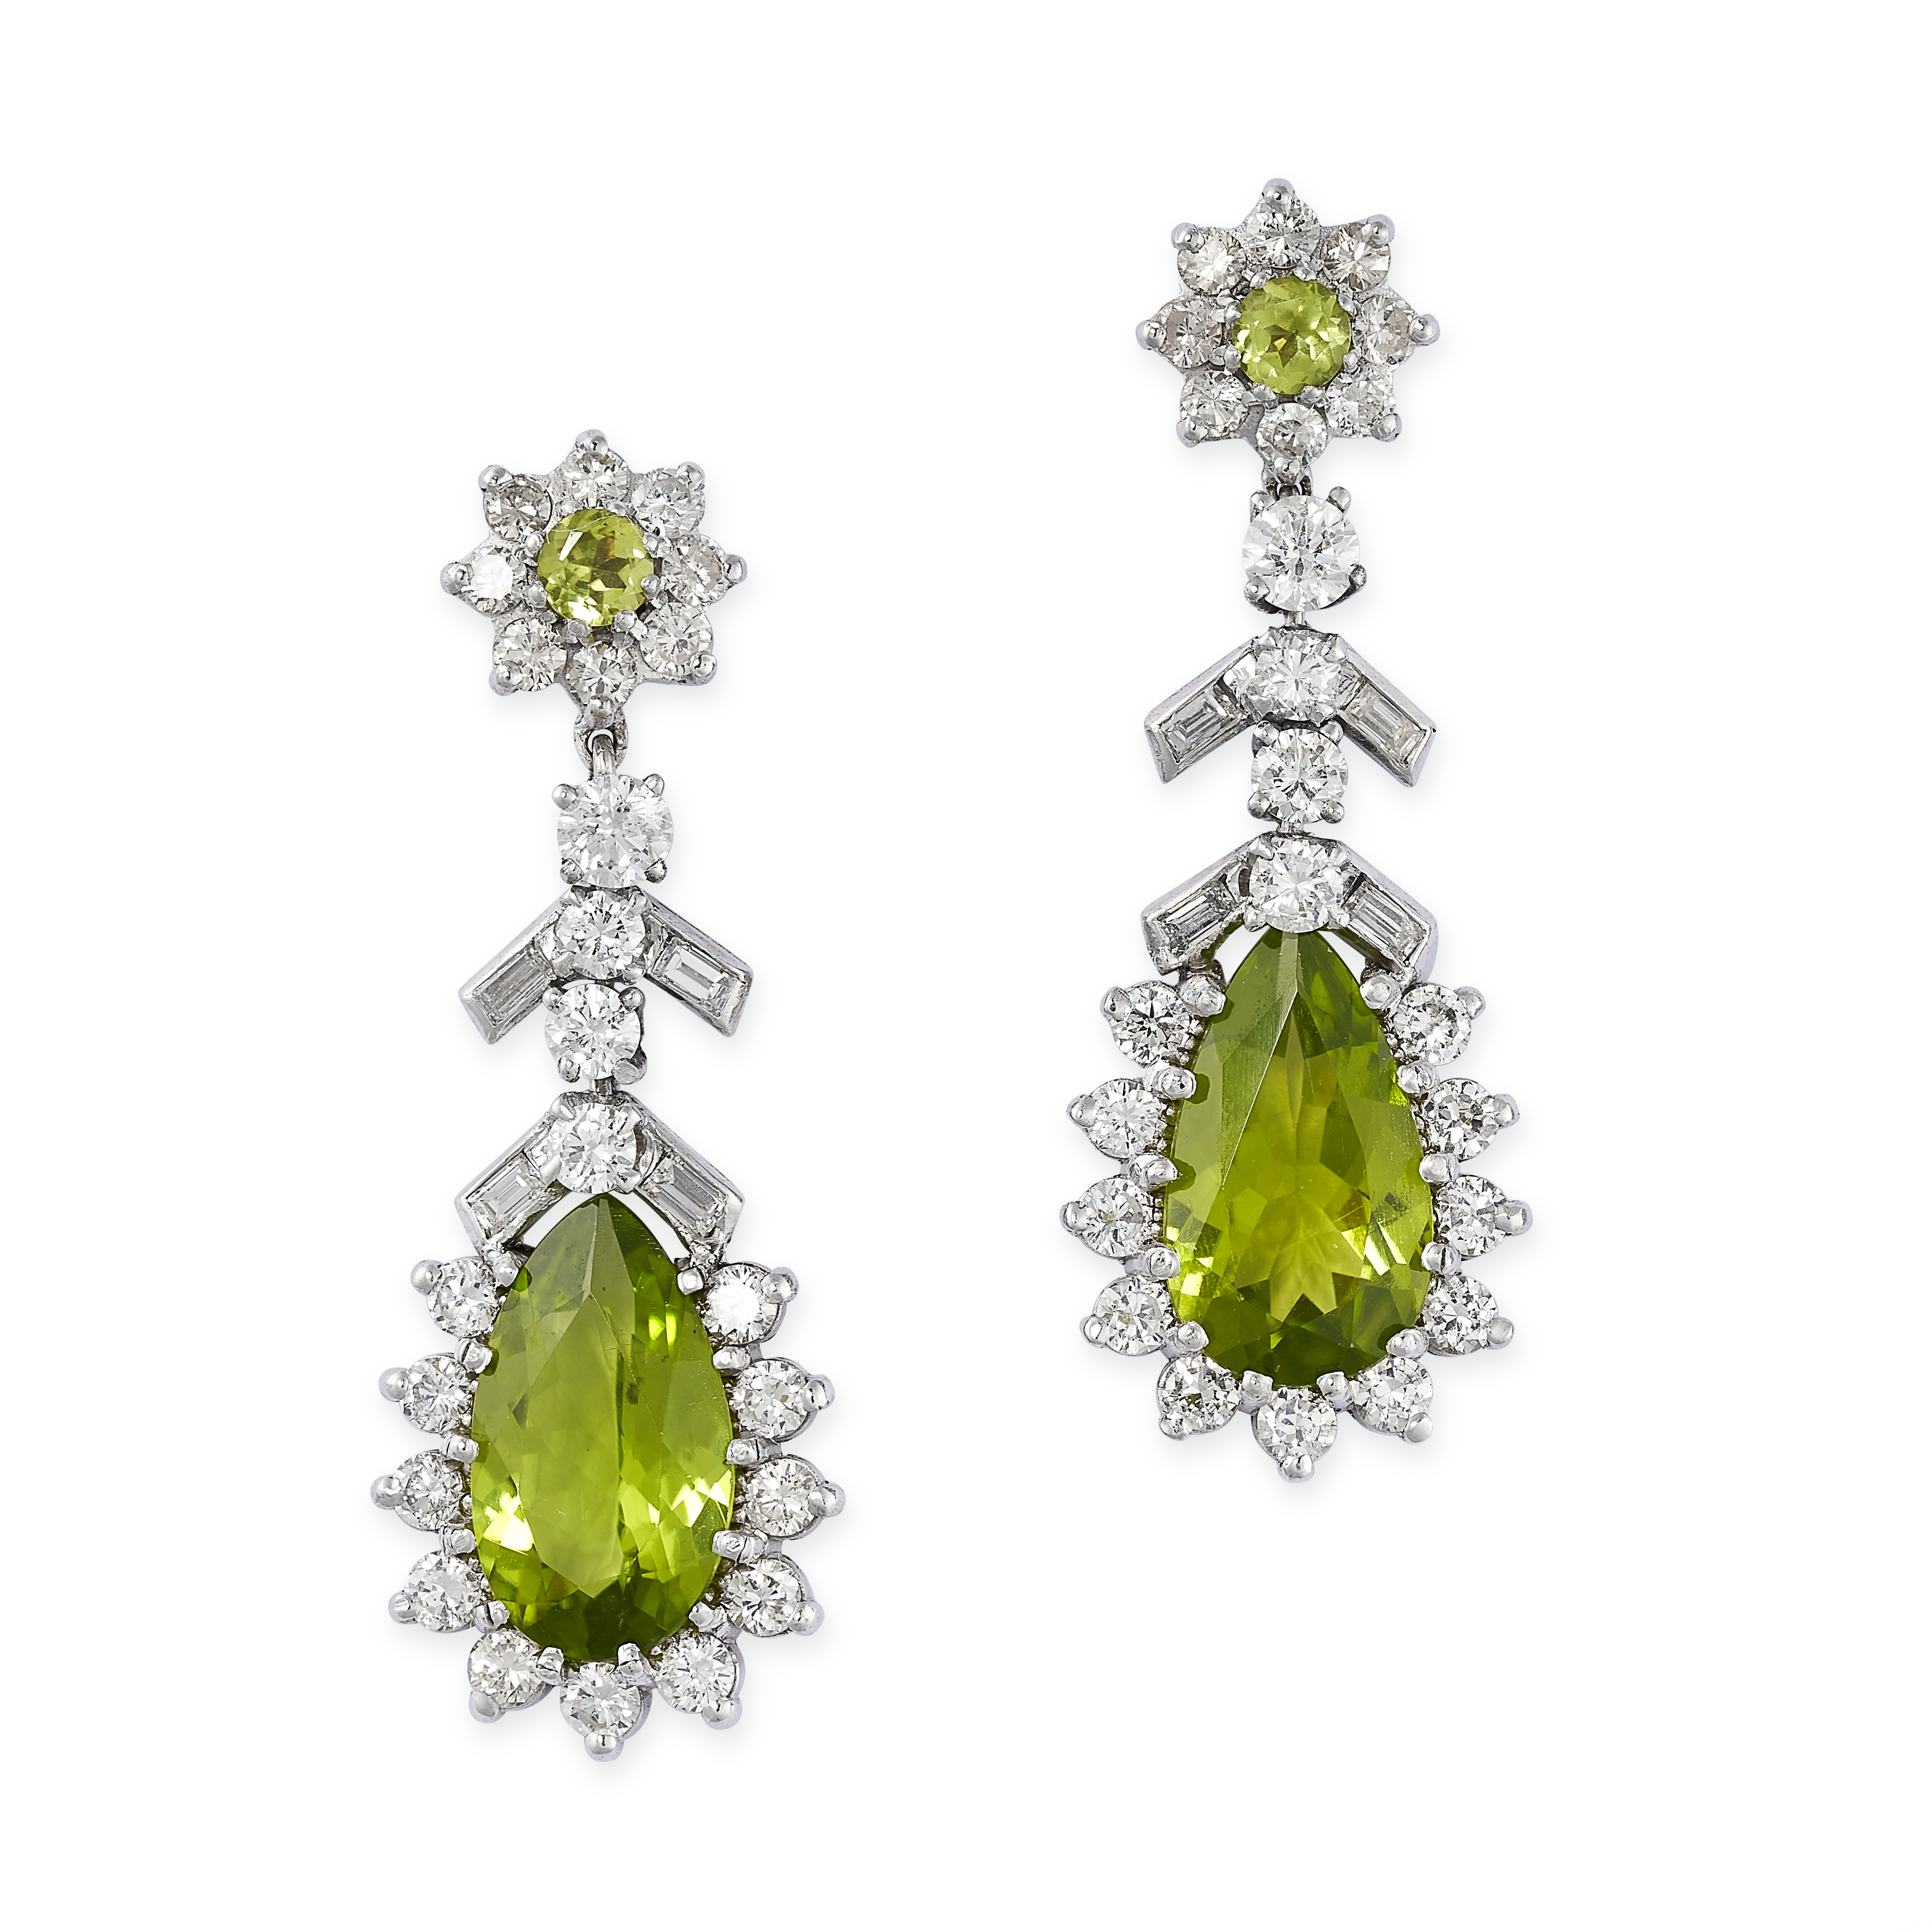 A PAIR OF PERIDOT AND DIAMOND EARRINGS in 18ct white gold, each set with a pear cut peridot